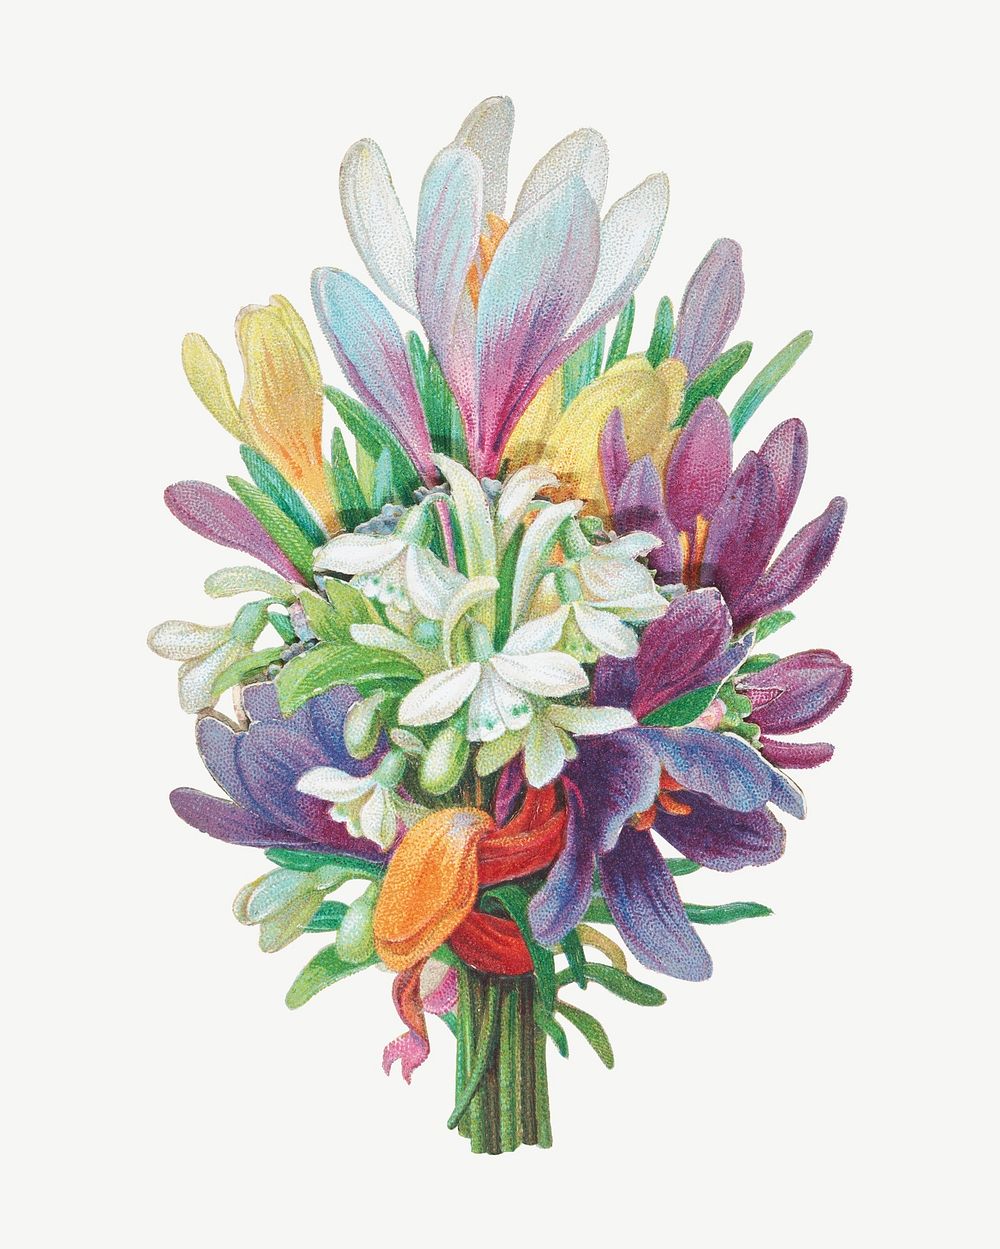 Colorful flower bouquet, vintage botanical illustration psd. Remixed by rawpixel.